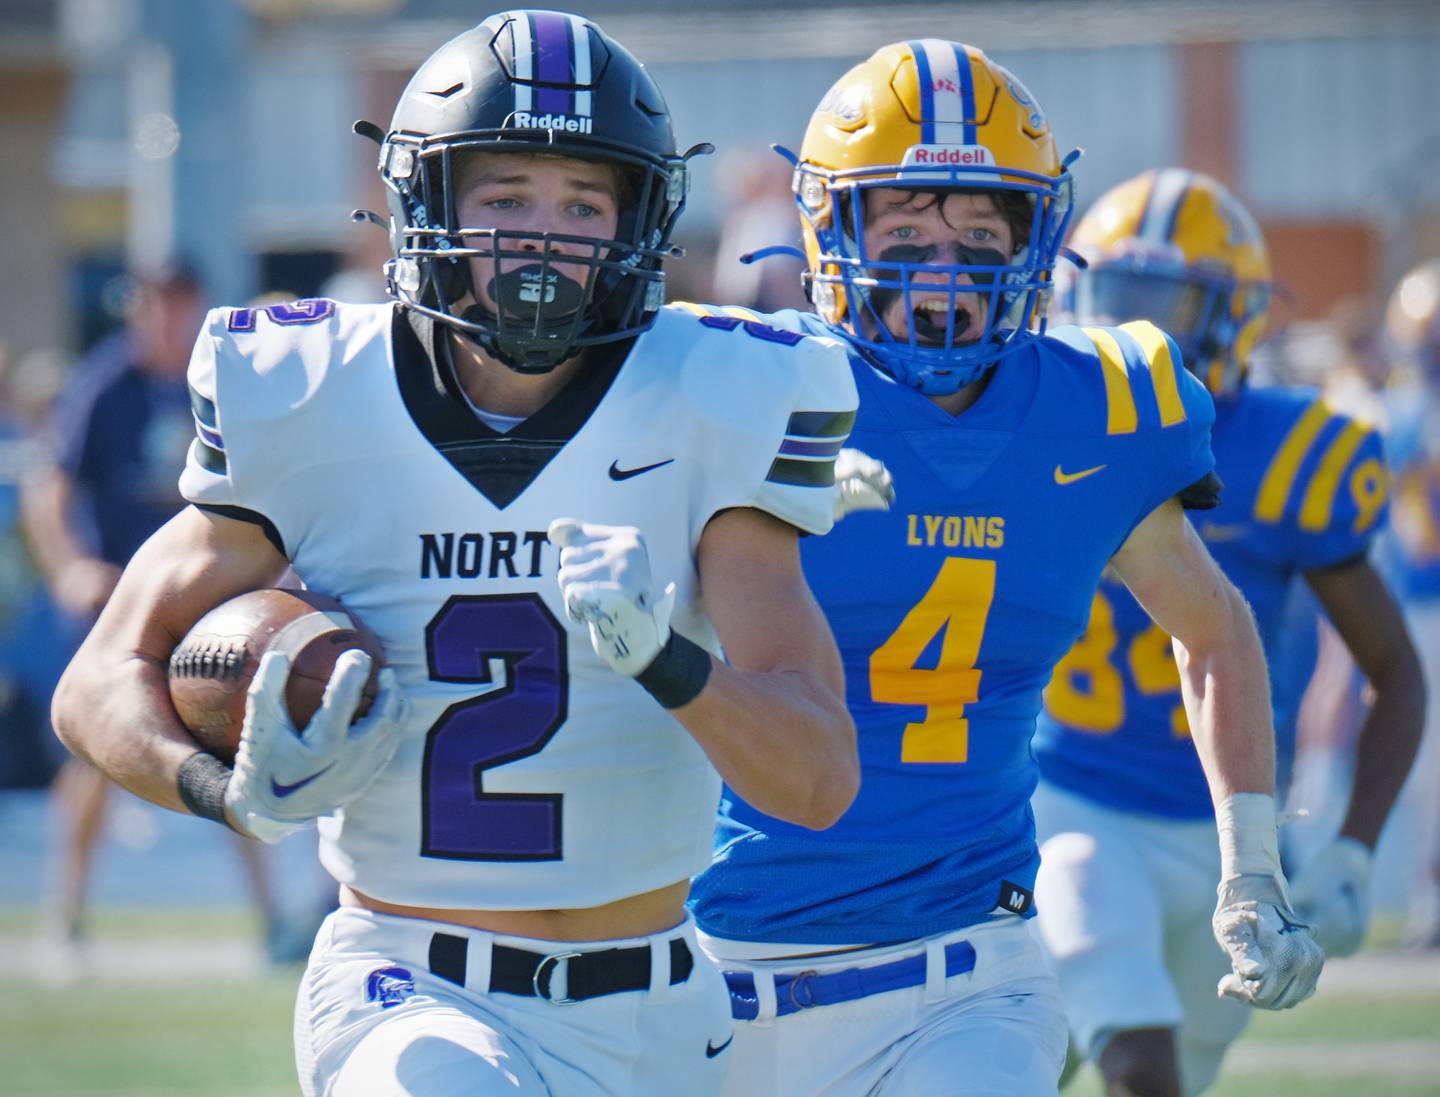 Downers Grove North wide receiver Will Guerin (2) races to the end zone after making a catch in front of Lyons Township's Quinn Farnan during a game on Oct. 22, 2022 at Lyons Township High School in LaGrange.